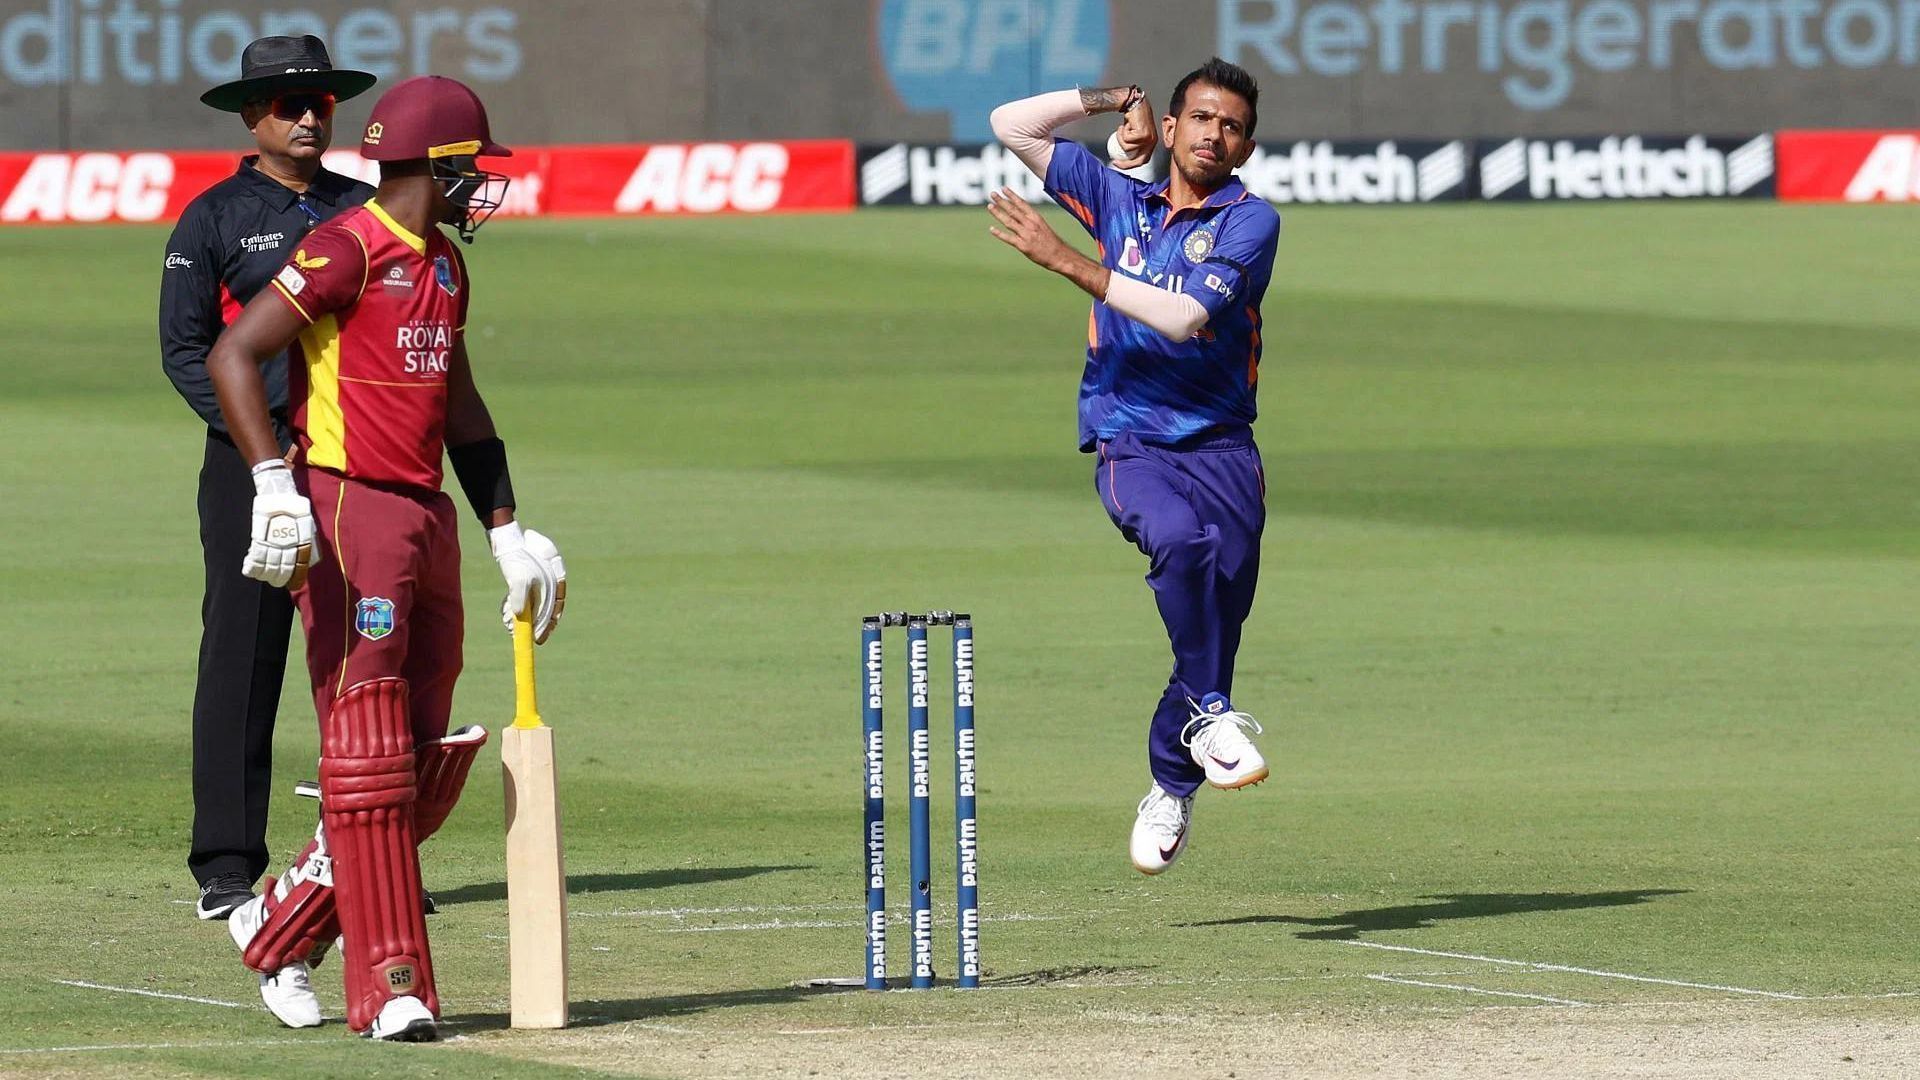 Yuzvendra Chahal in action in the ODI series against West Indies. (P.C.:Twitter)